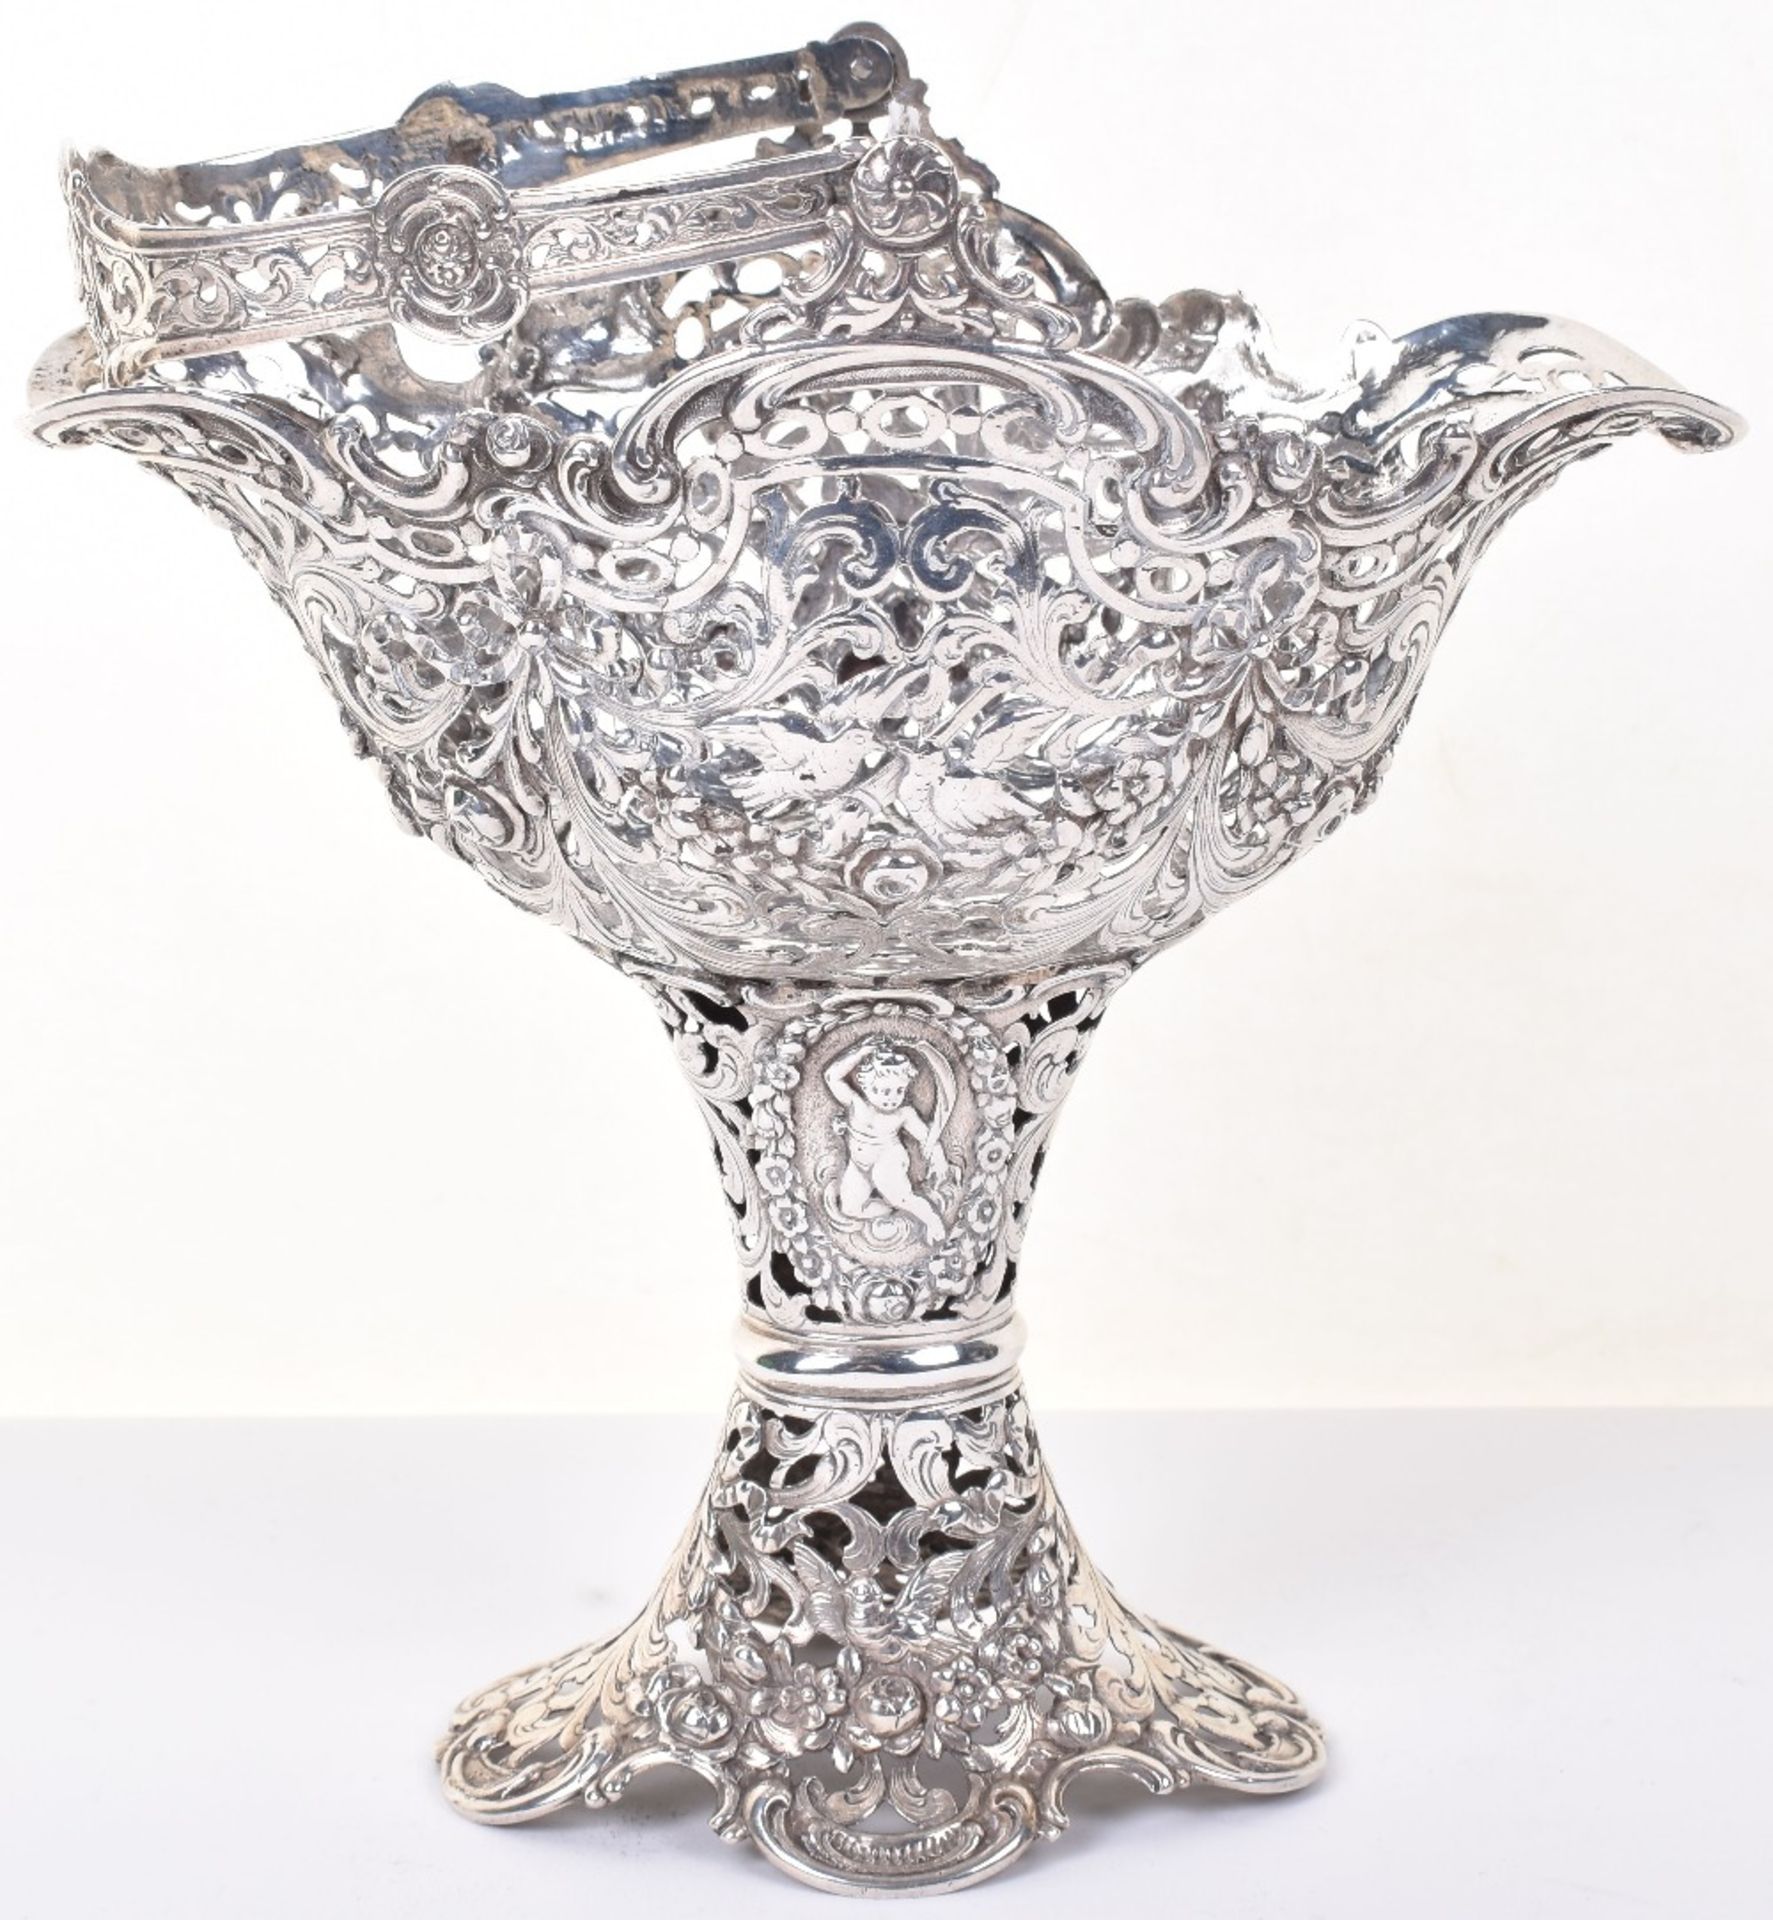 A 19th century German silver (.800) sweet basket - Image 2 of 6